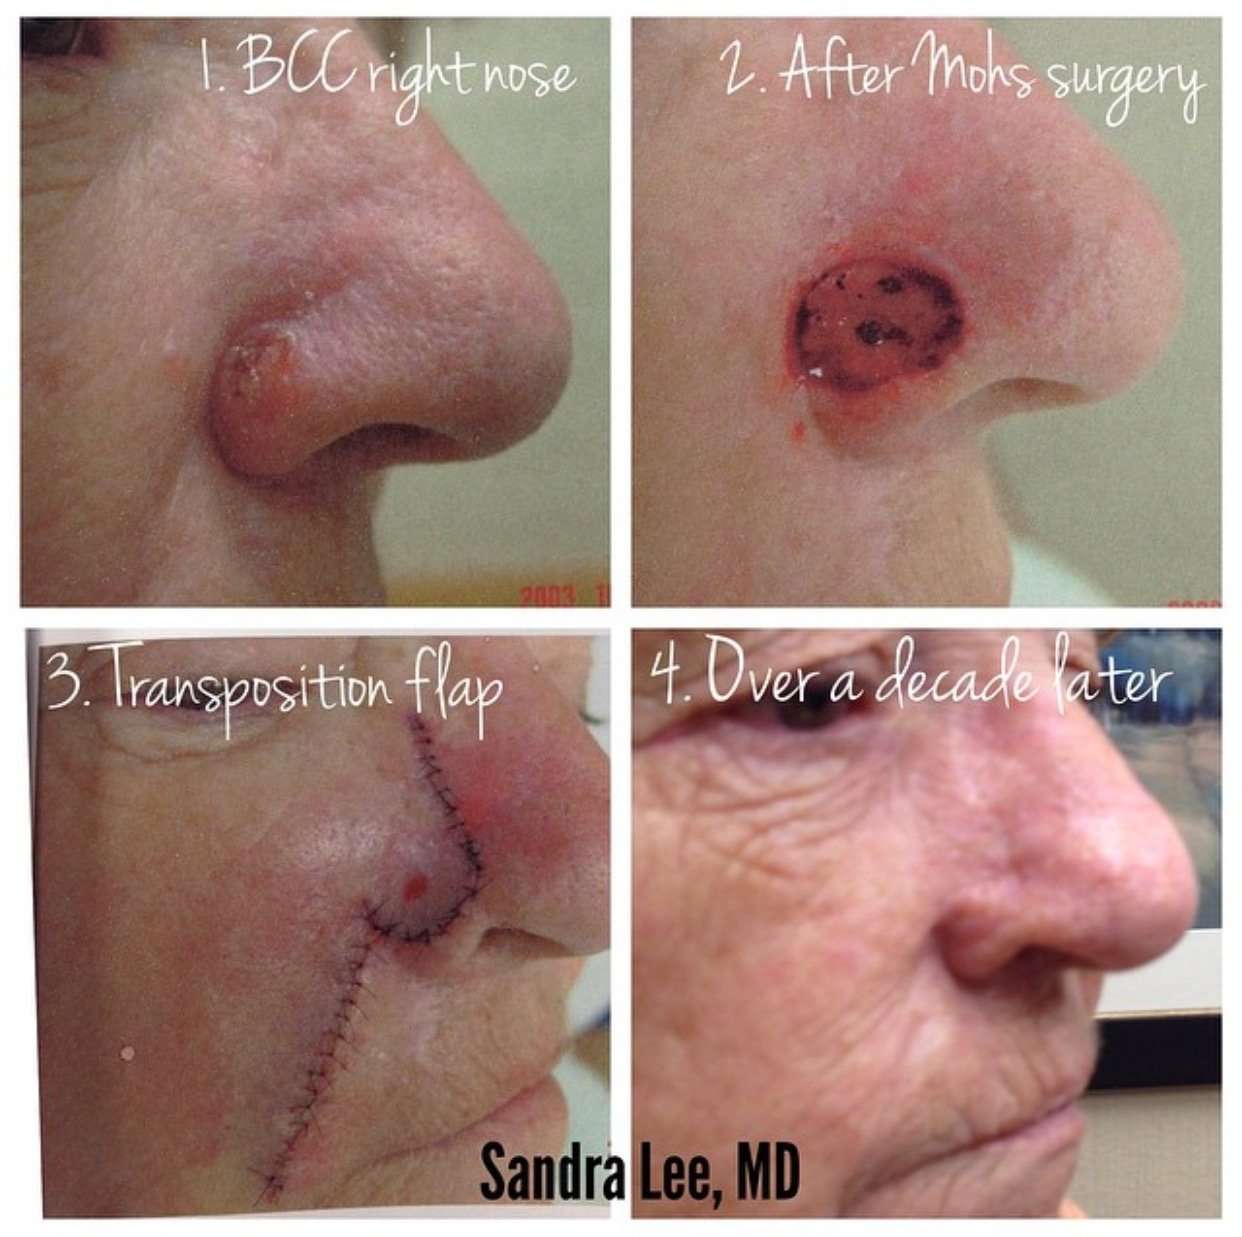 MOHs surgery skin cancer